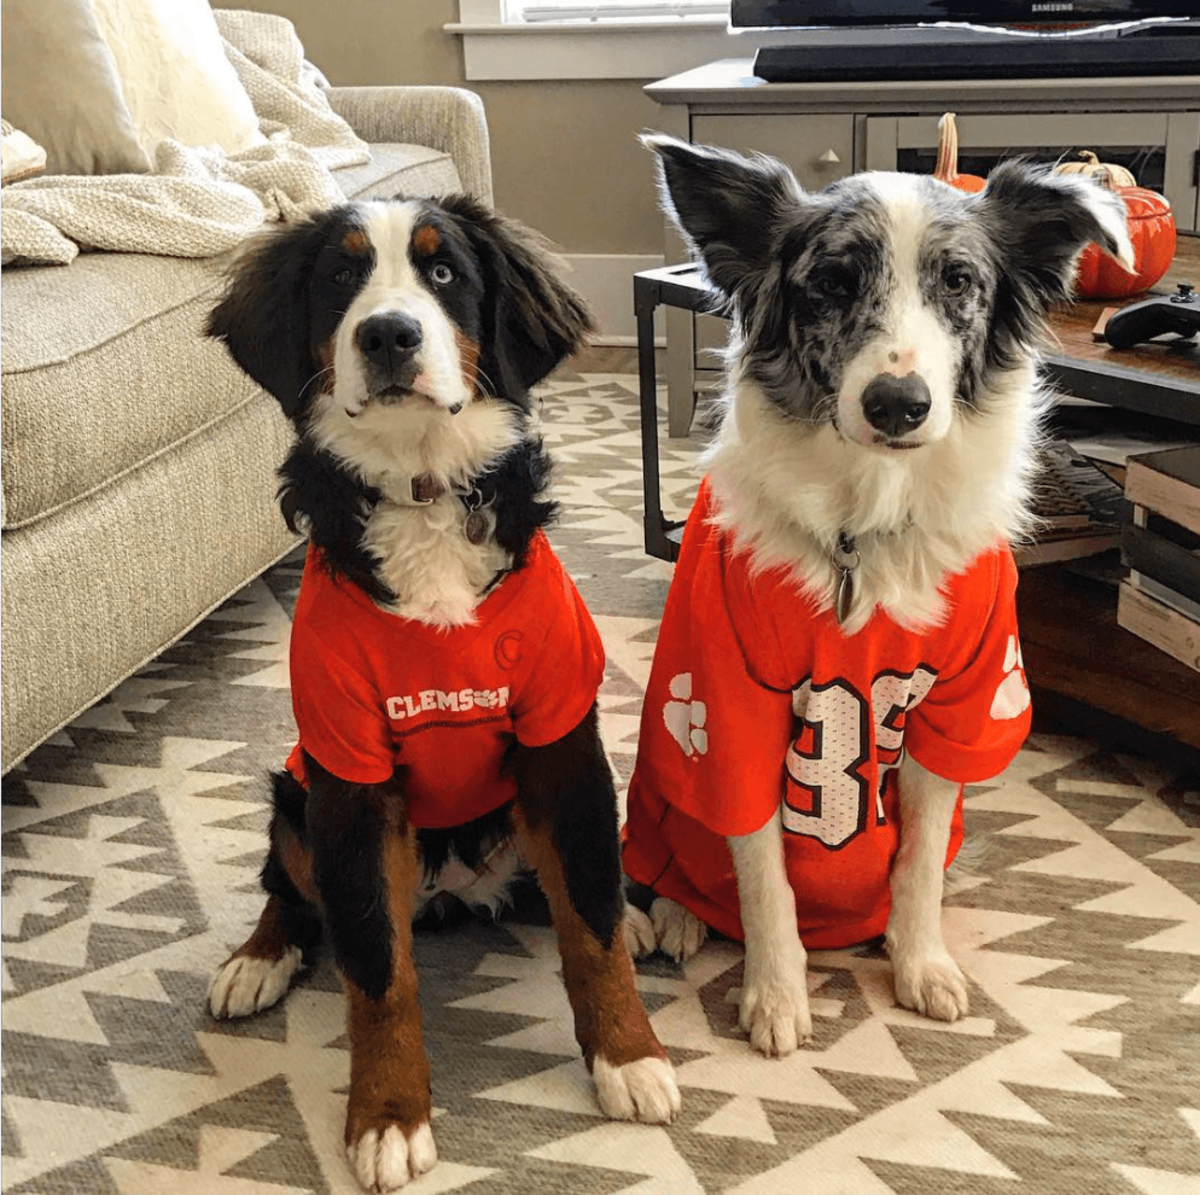 Two dogs wear their Clemson jerseys and shirts.